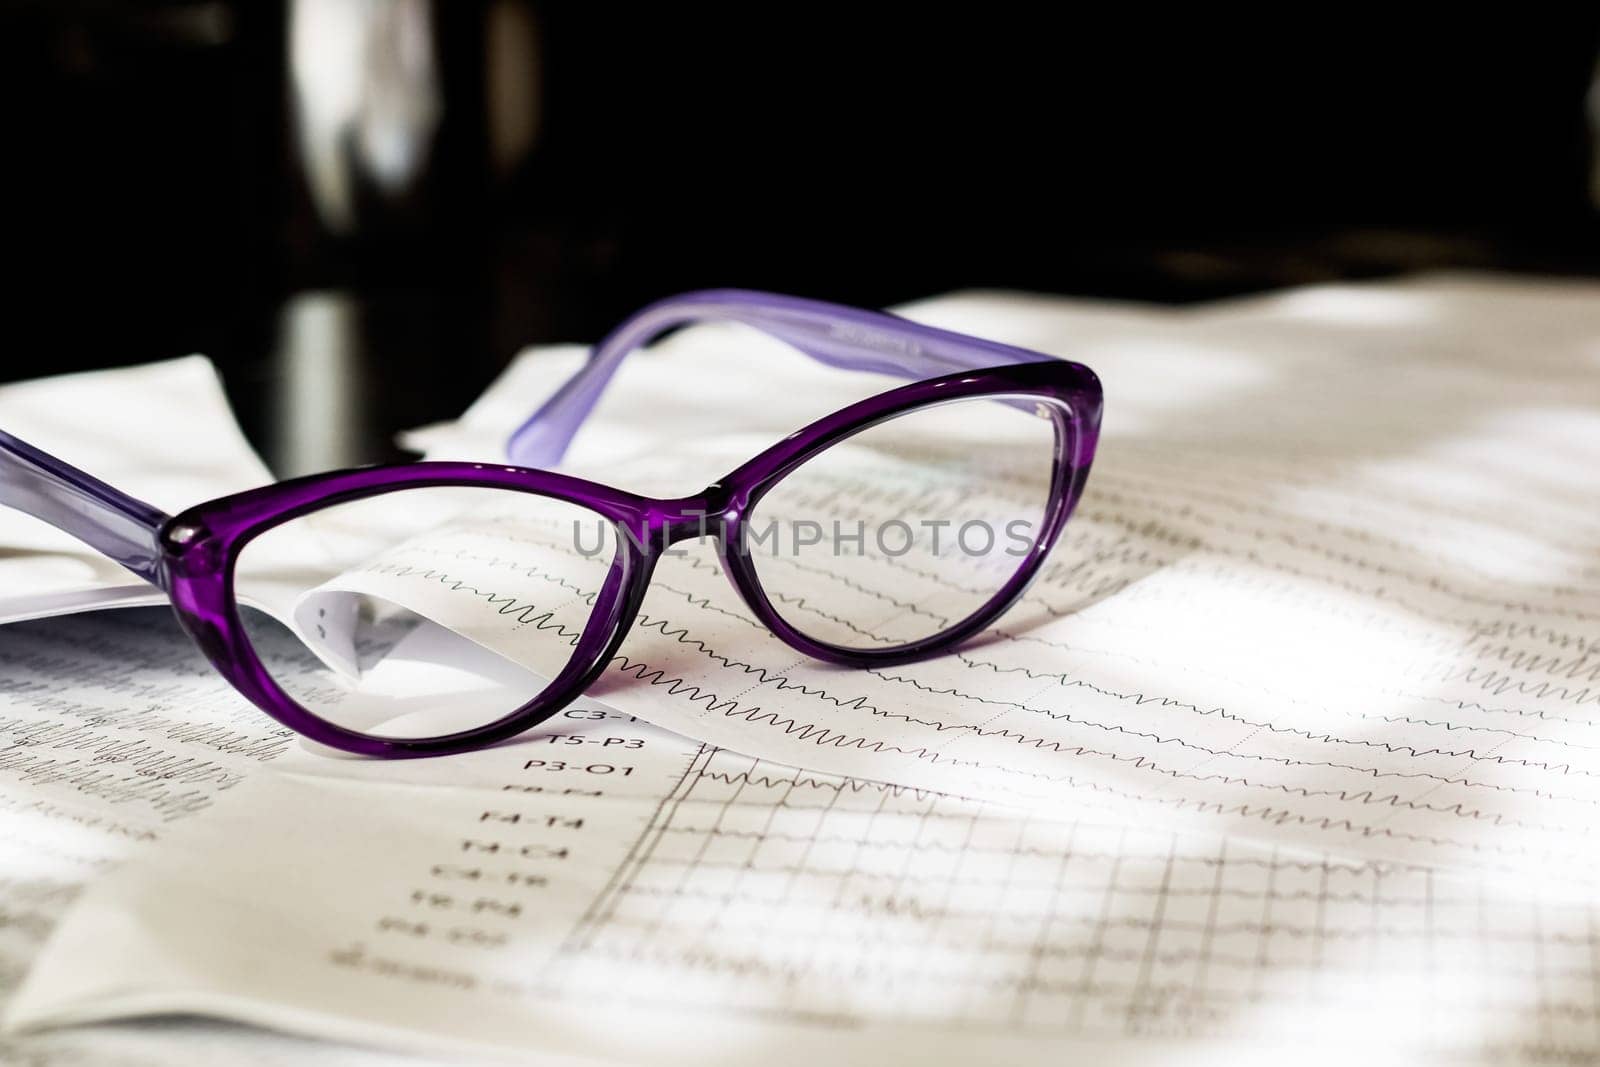 Electroencephalogram result on paper and glasses closeup, brain activity test